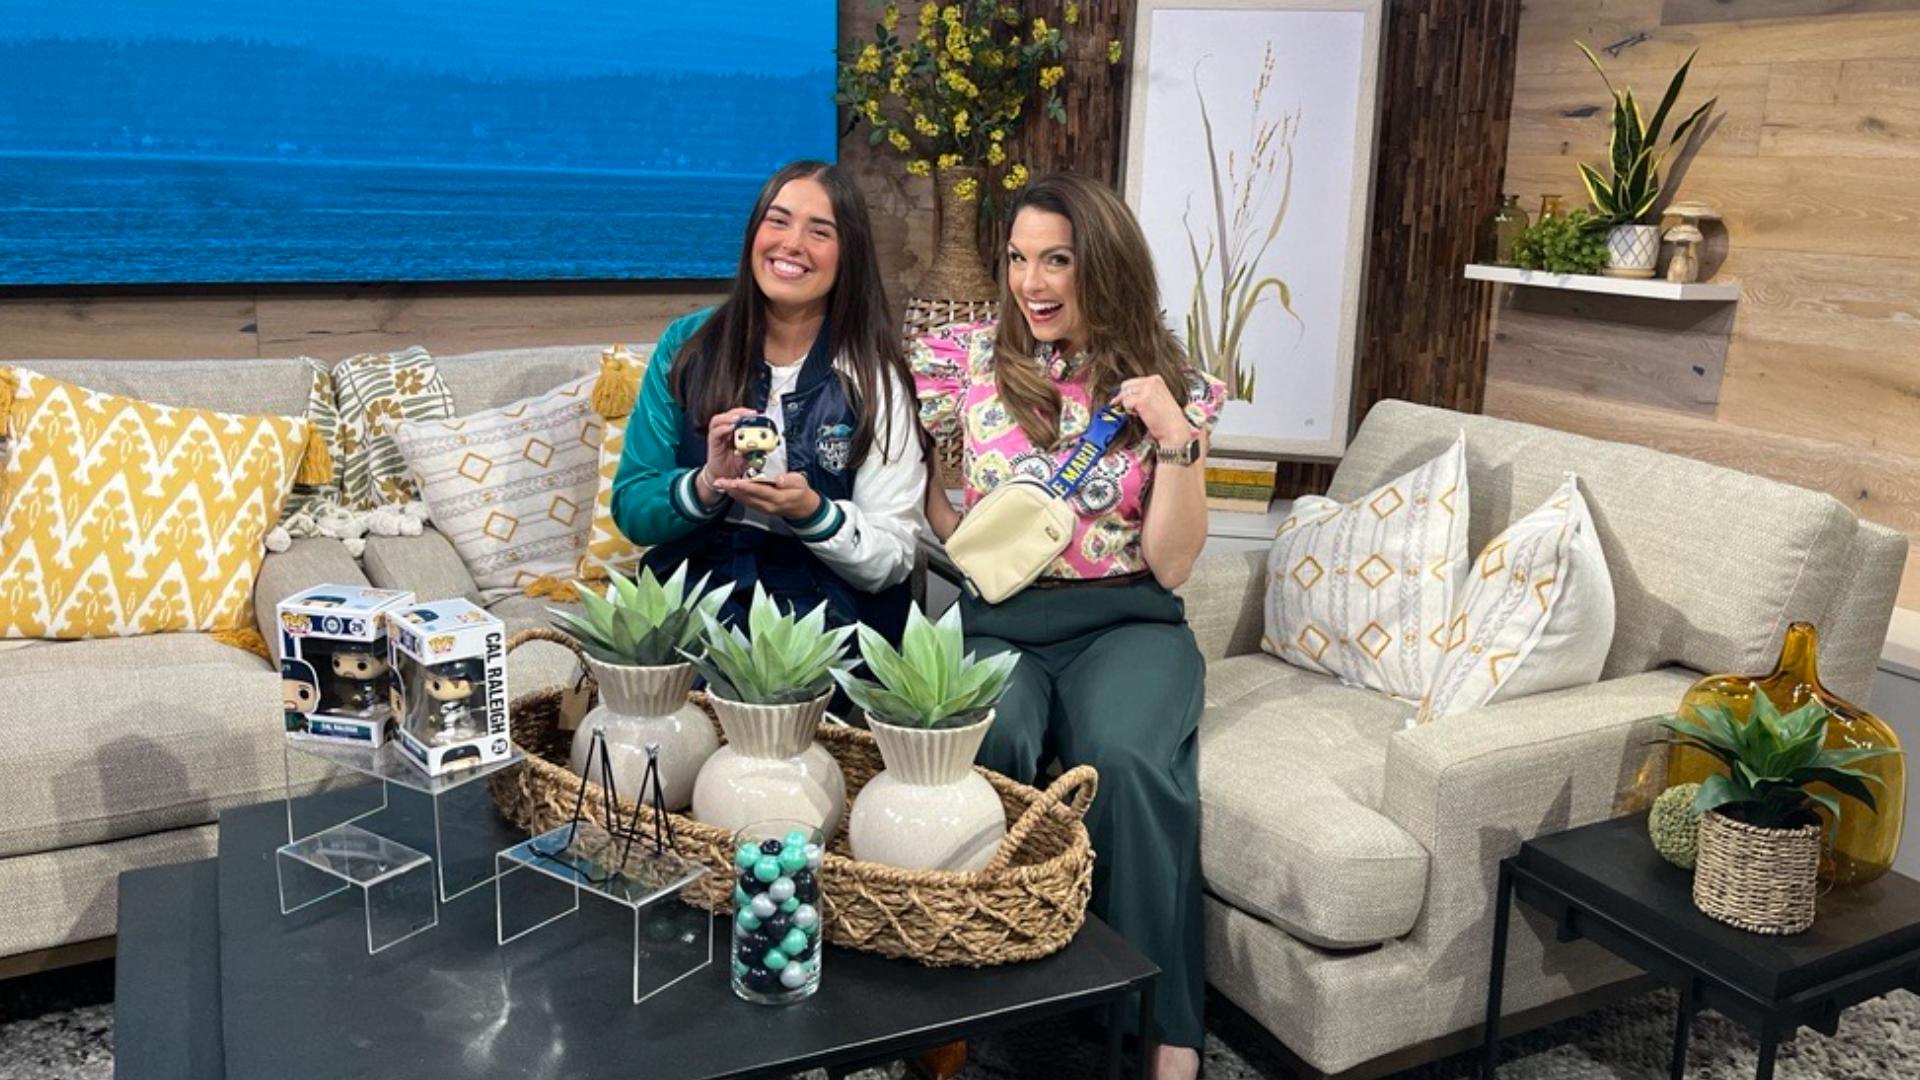 Madison MacPhee from the Mariners talks about all the things the park has in store for moms this weekend - including some giveaways. #newdaynw